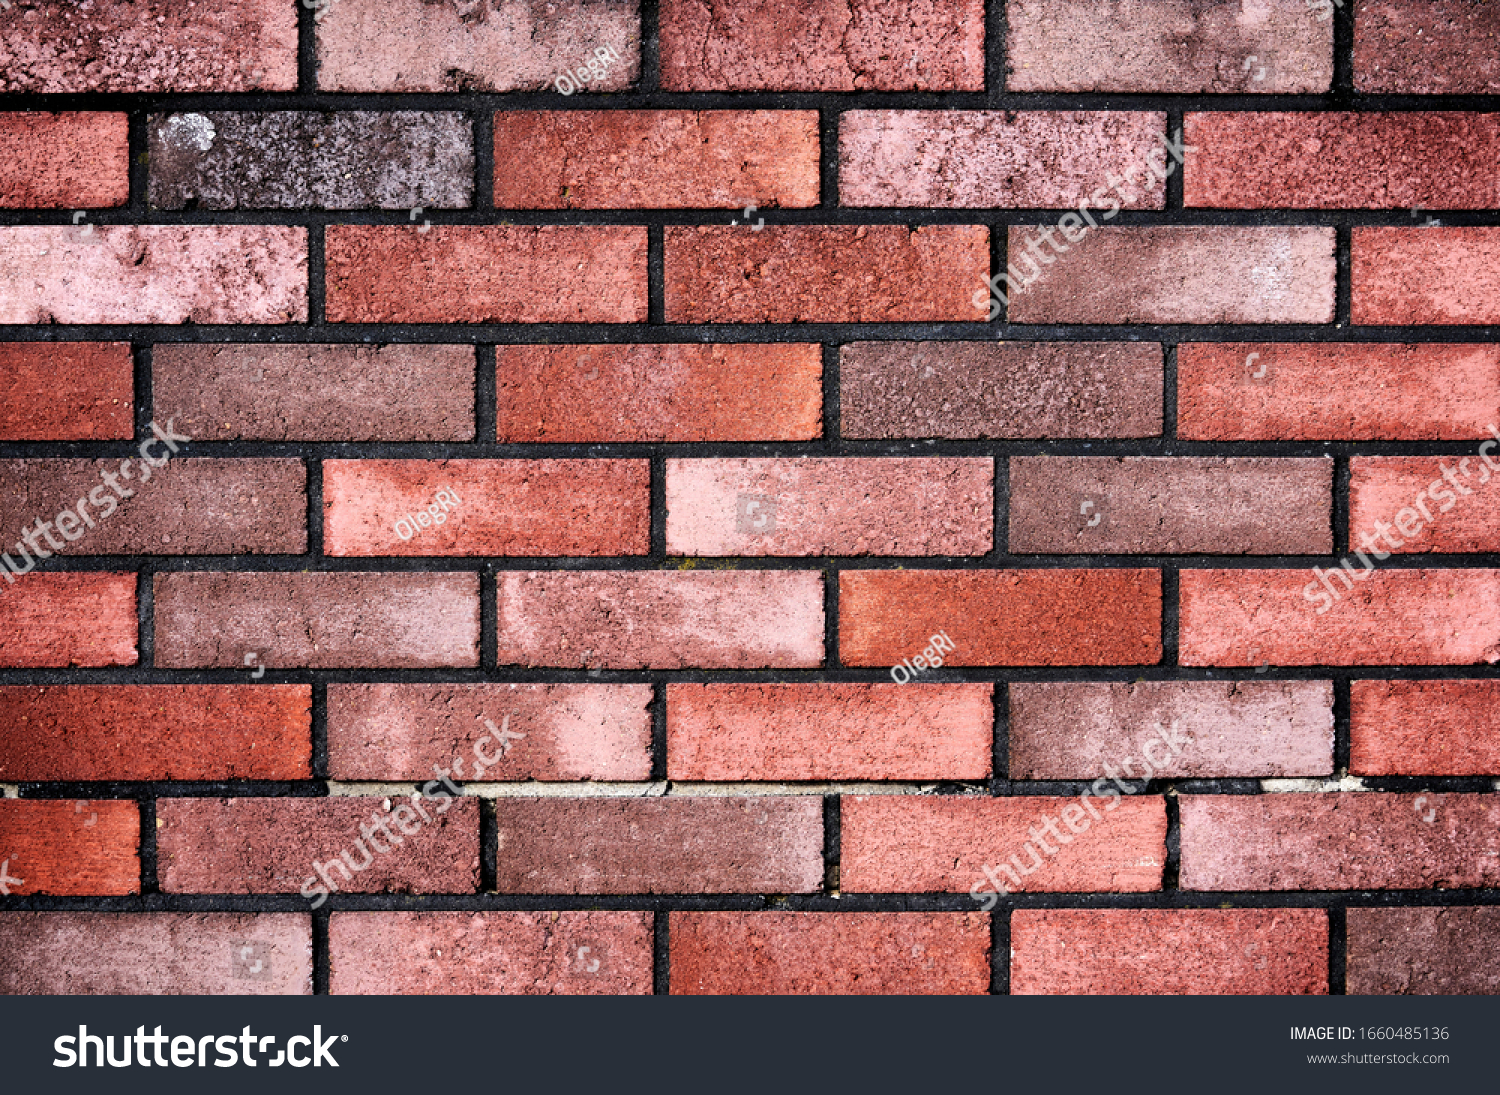 Brick wall with red brick, red brick background. #1660485136